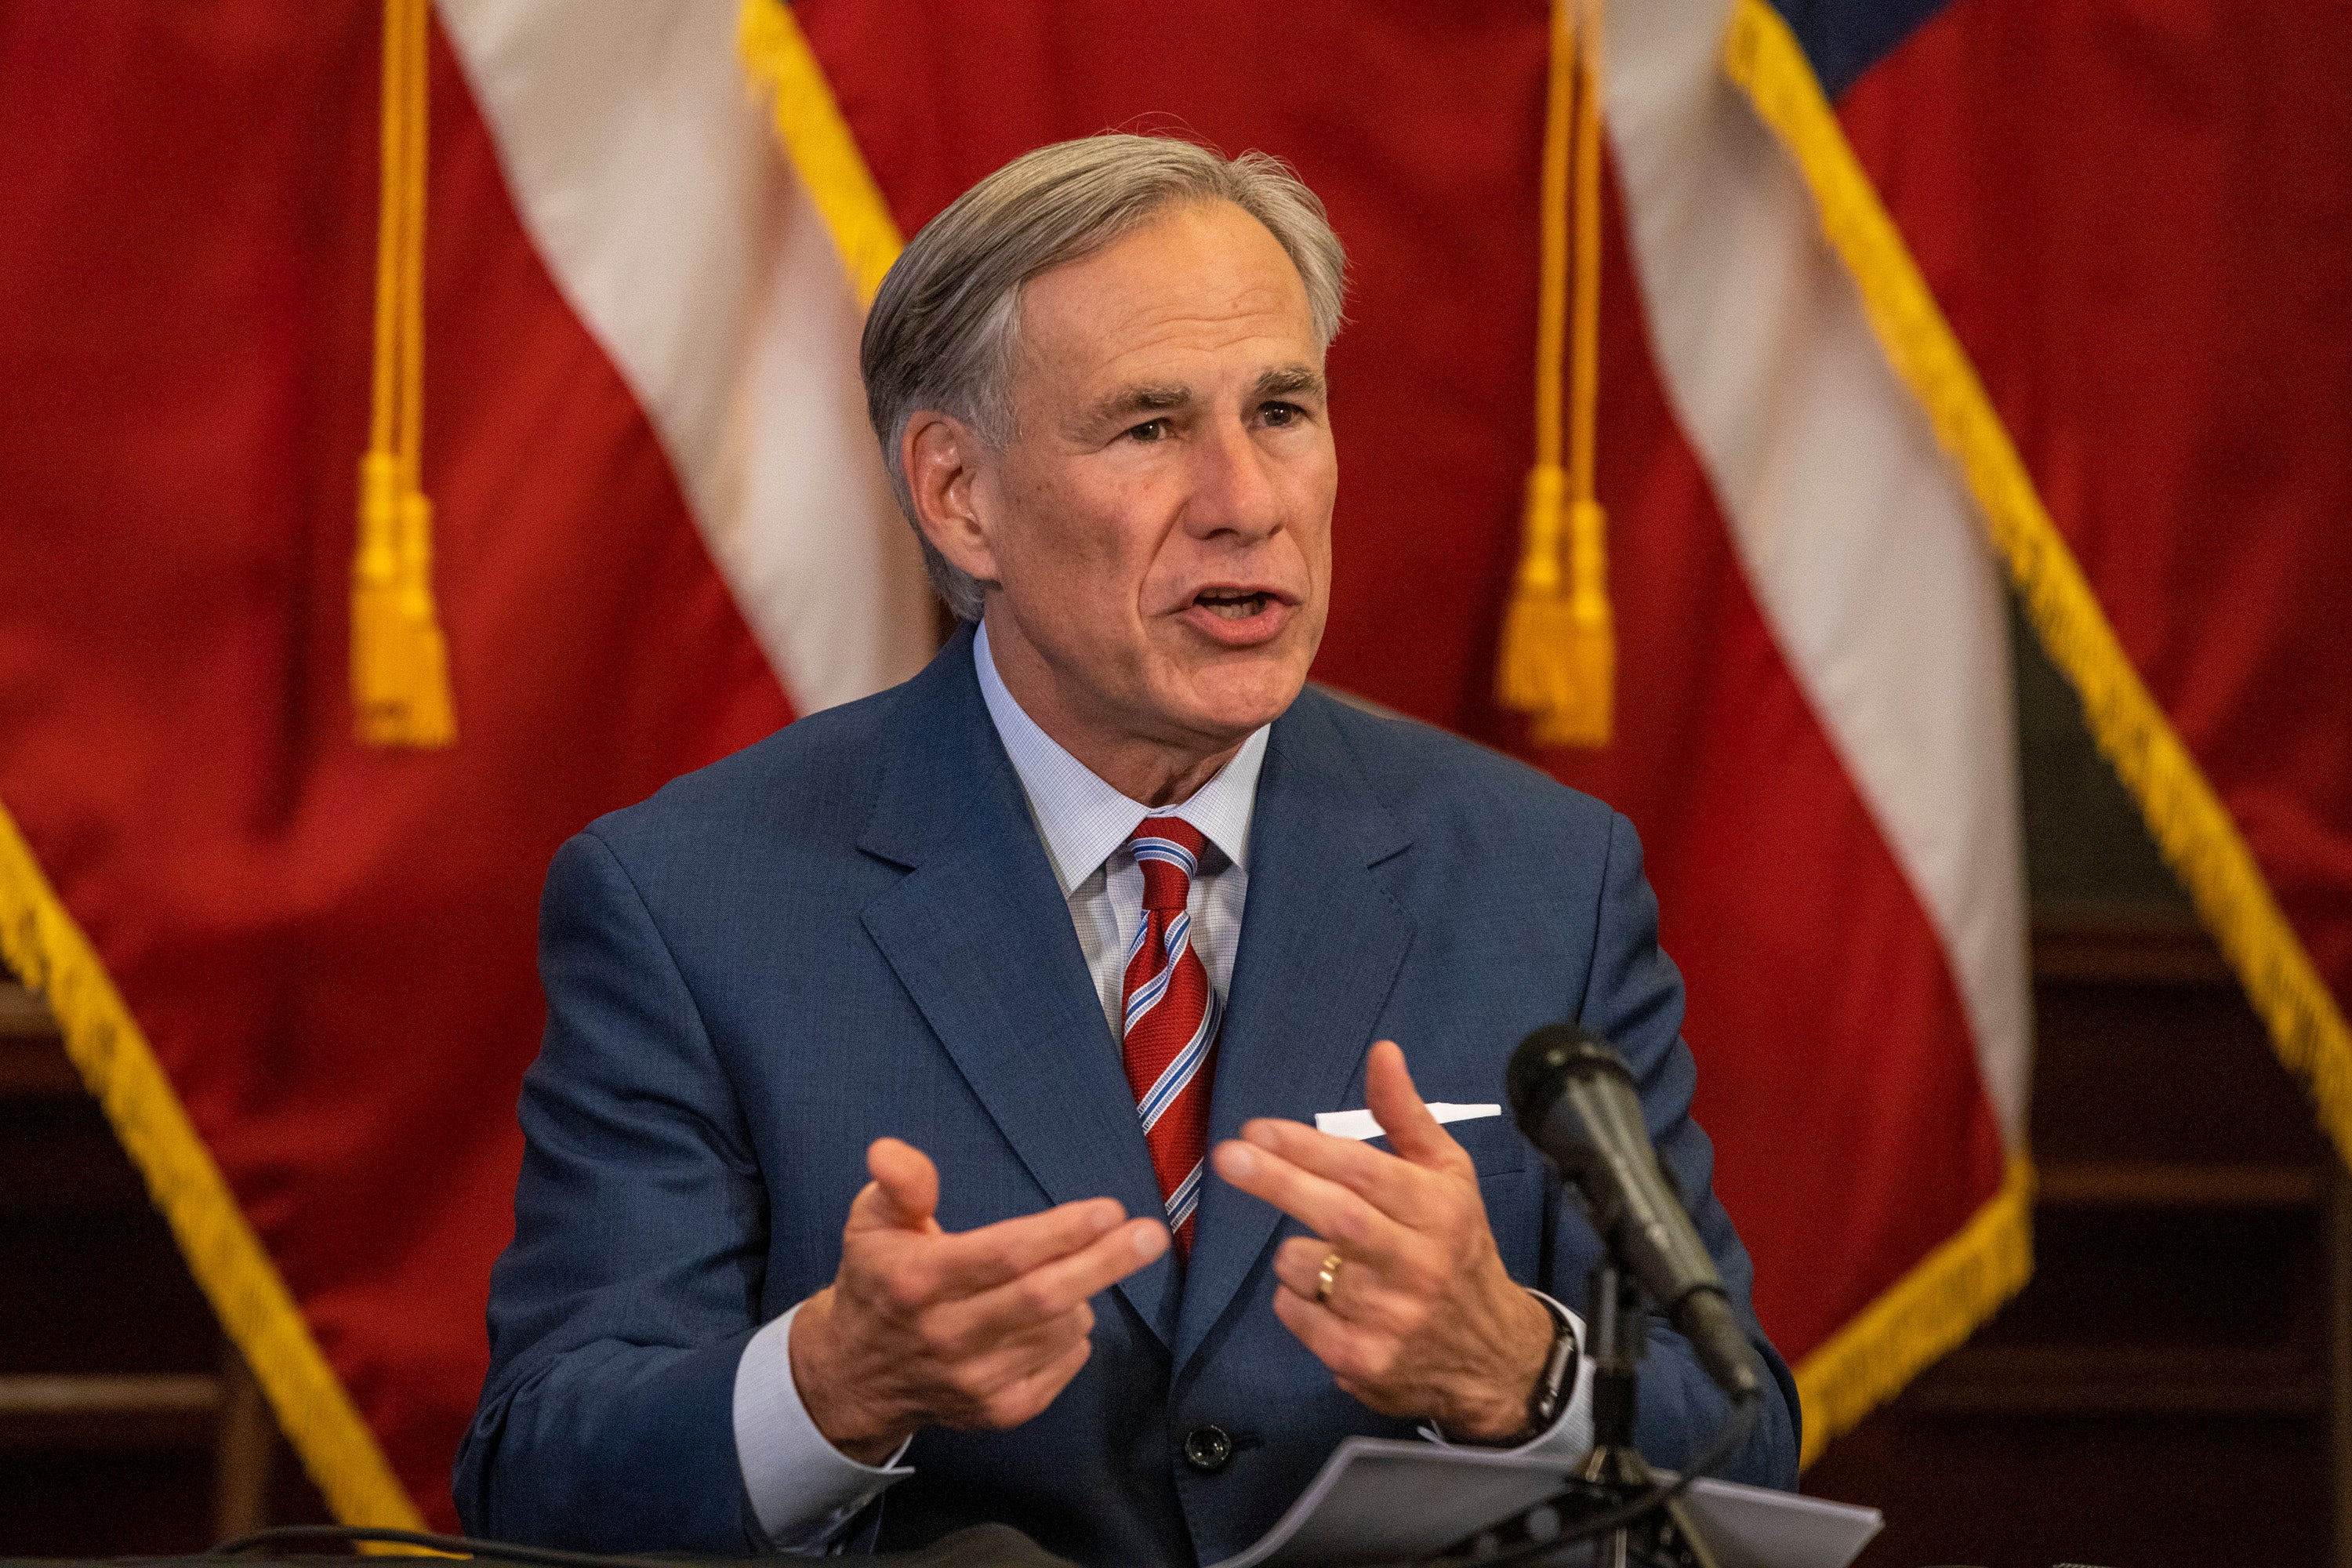 Texas governor Greg Abbott, pictured at a pandemic press conference in May 2020, has vowed to pass a law punishing large cities for defunding the police